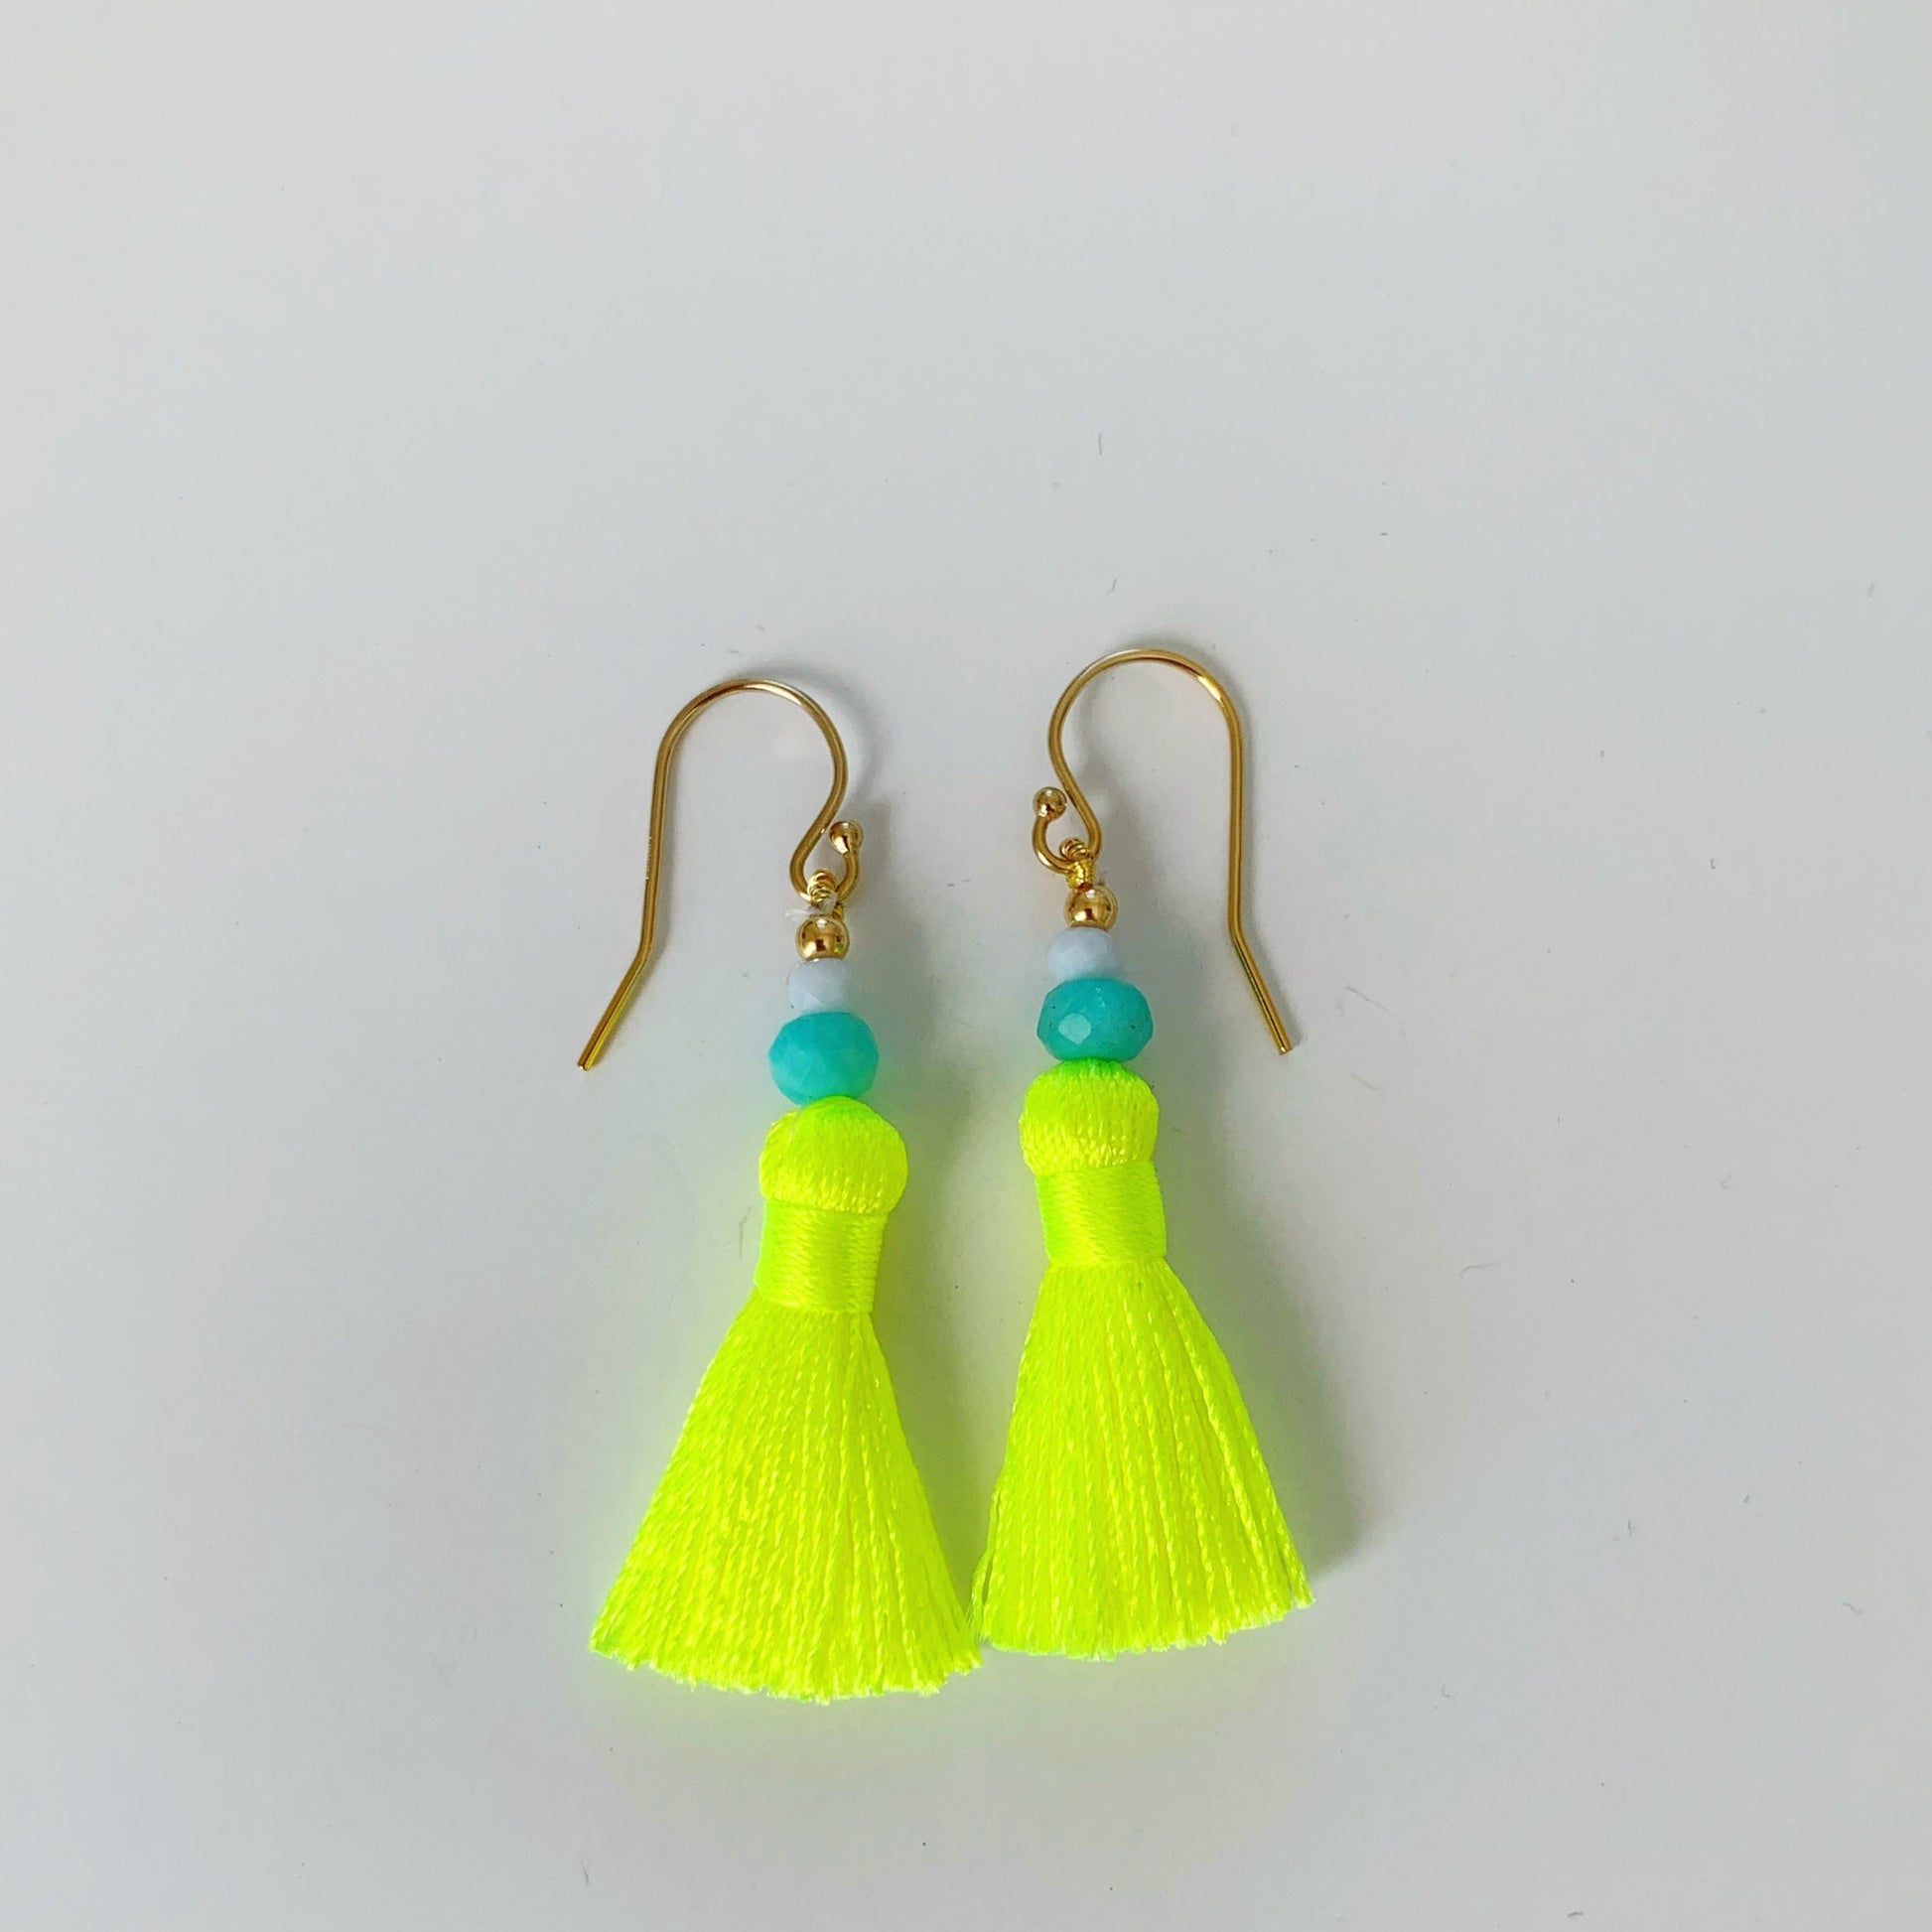 Captiva Tassel earrings by mermaids and madeleines are neon yellow tassels with amazonite, blue lace agate and 14k gold filled findings. this pair is pictured on a white surface